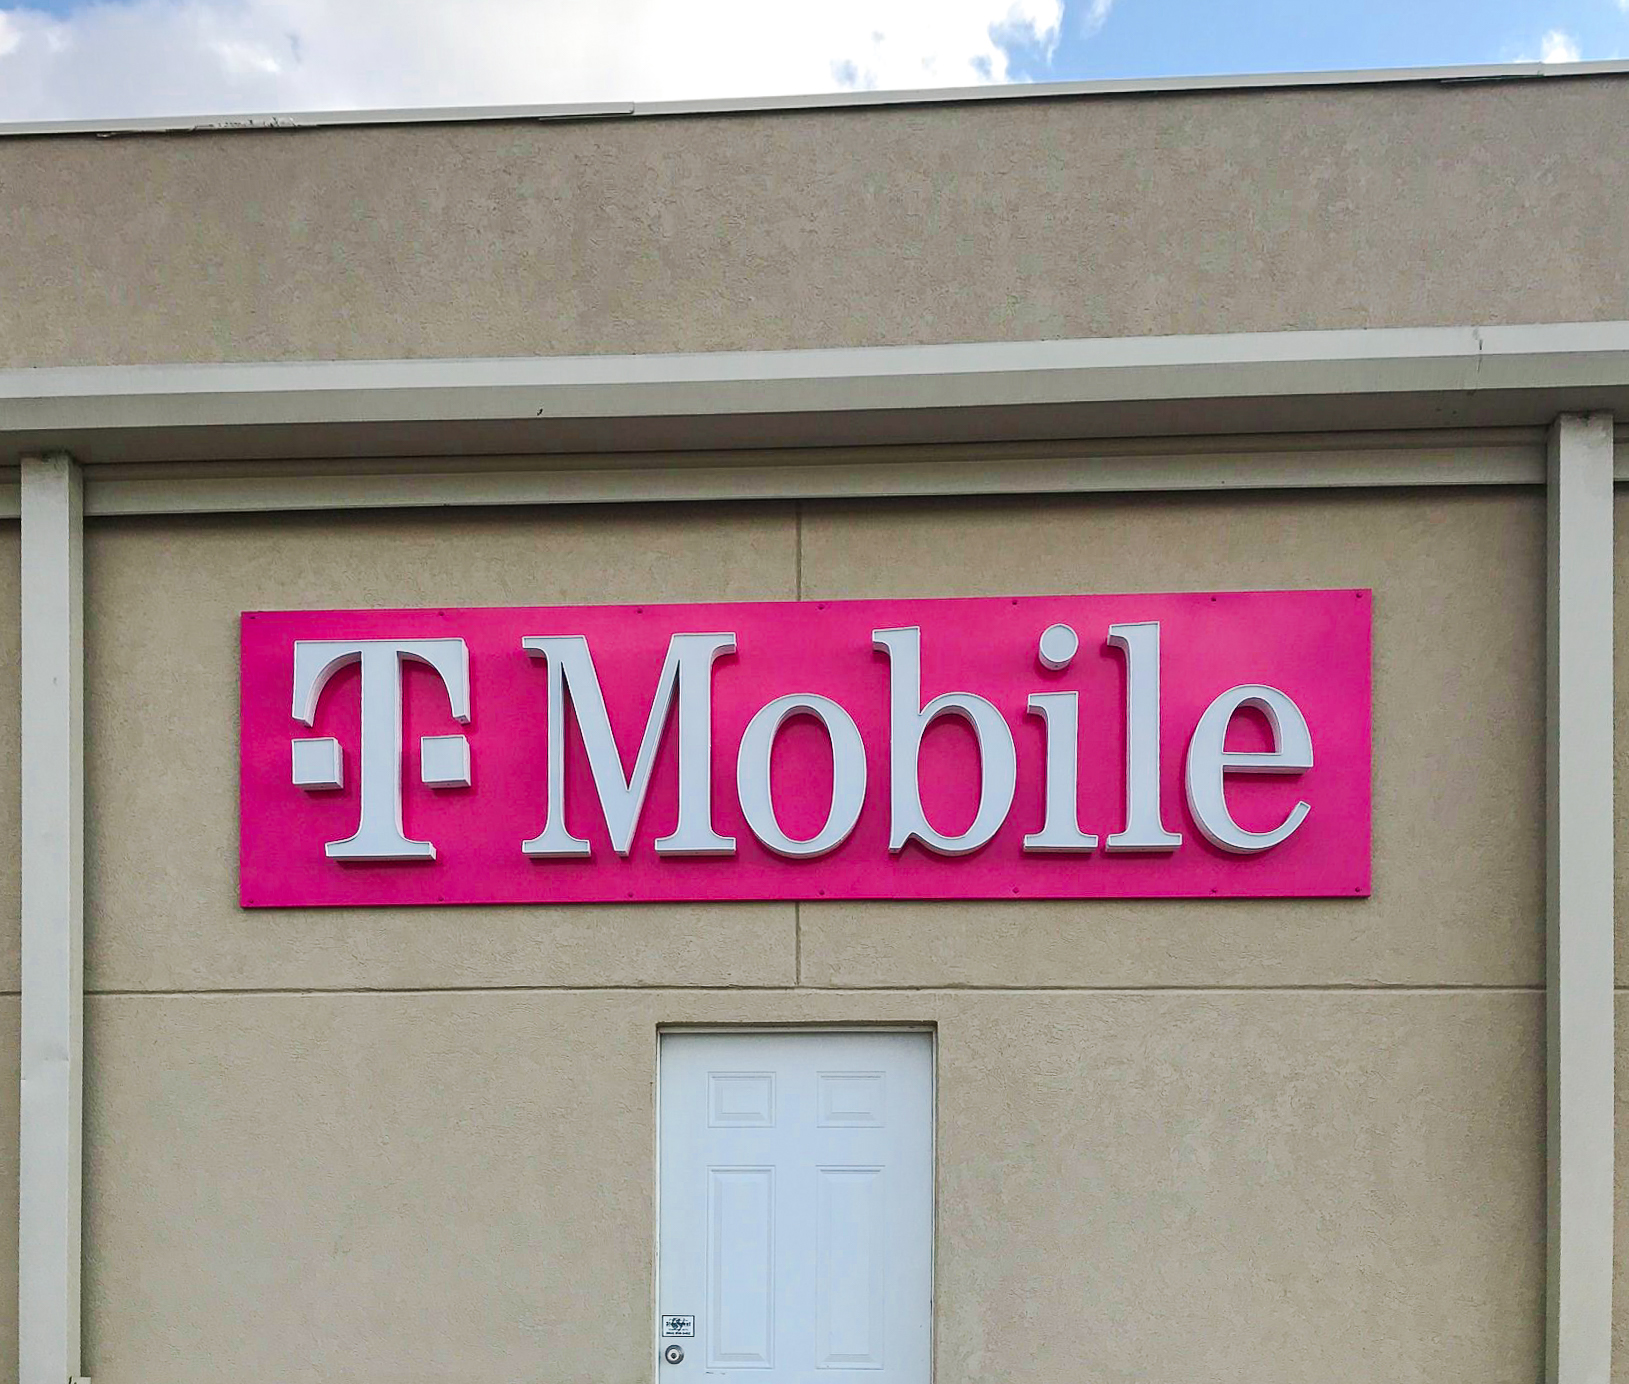 Internally lighted channel letters for T-Mobile in Texarkana, TX